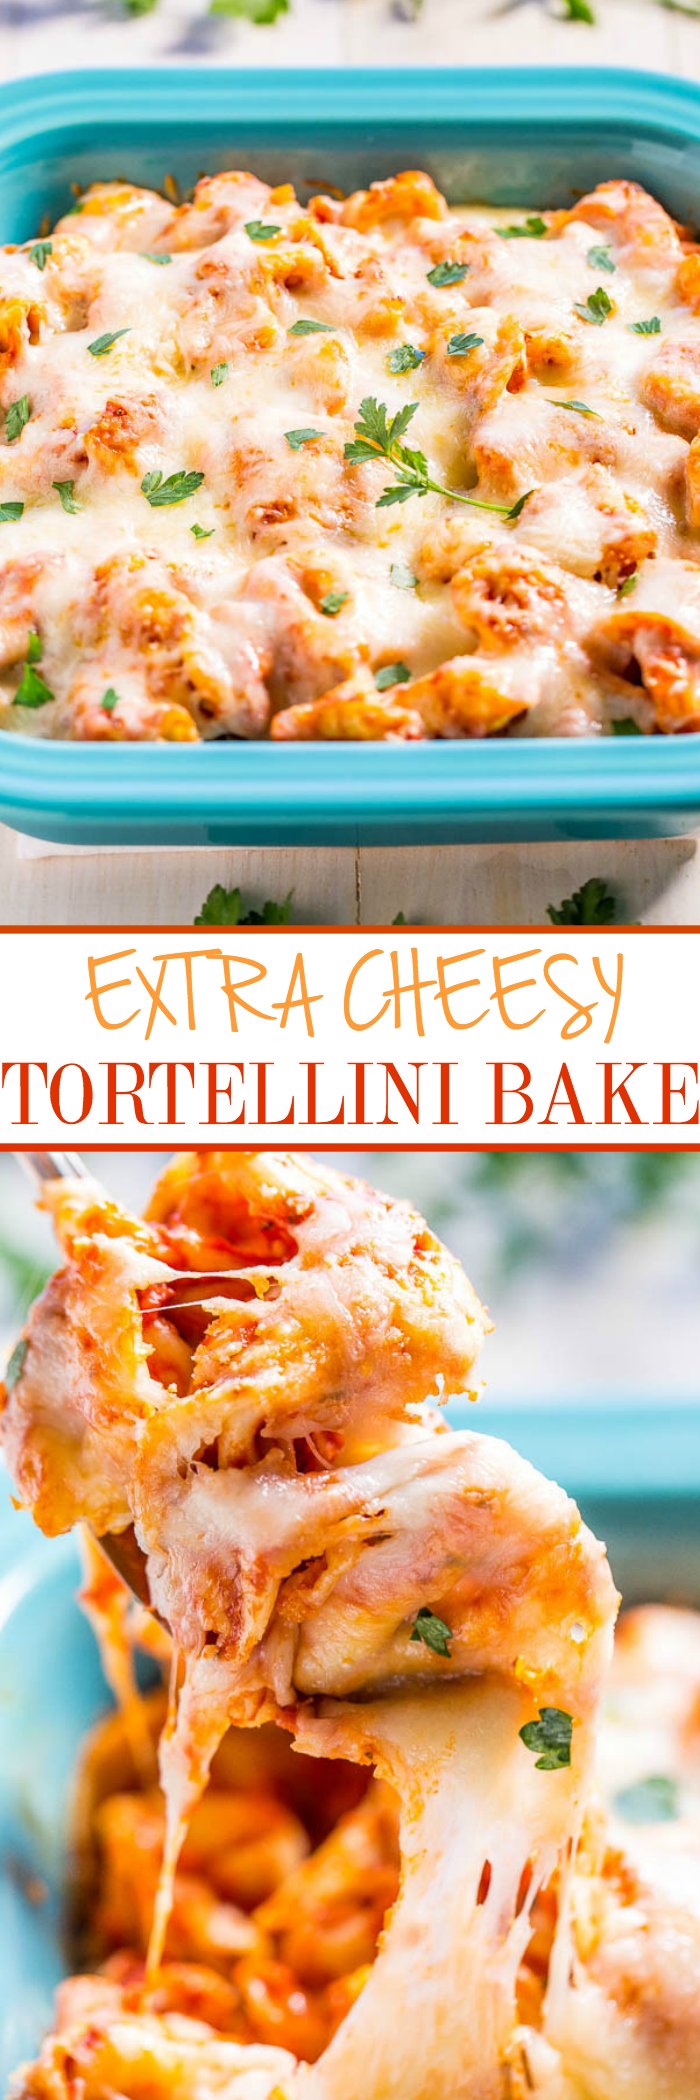 Extra Cheesy Tortellini Bake - Three-cheese tortellini baked with pasta sauce AND 3 more cheeses!! Cheese lovers will adore this easy comfort food that's ready in 30 minutes!!